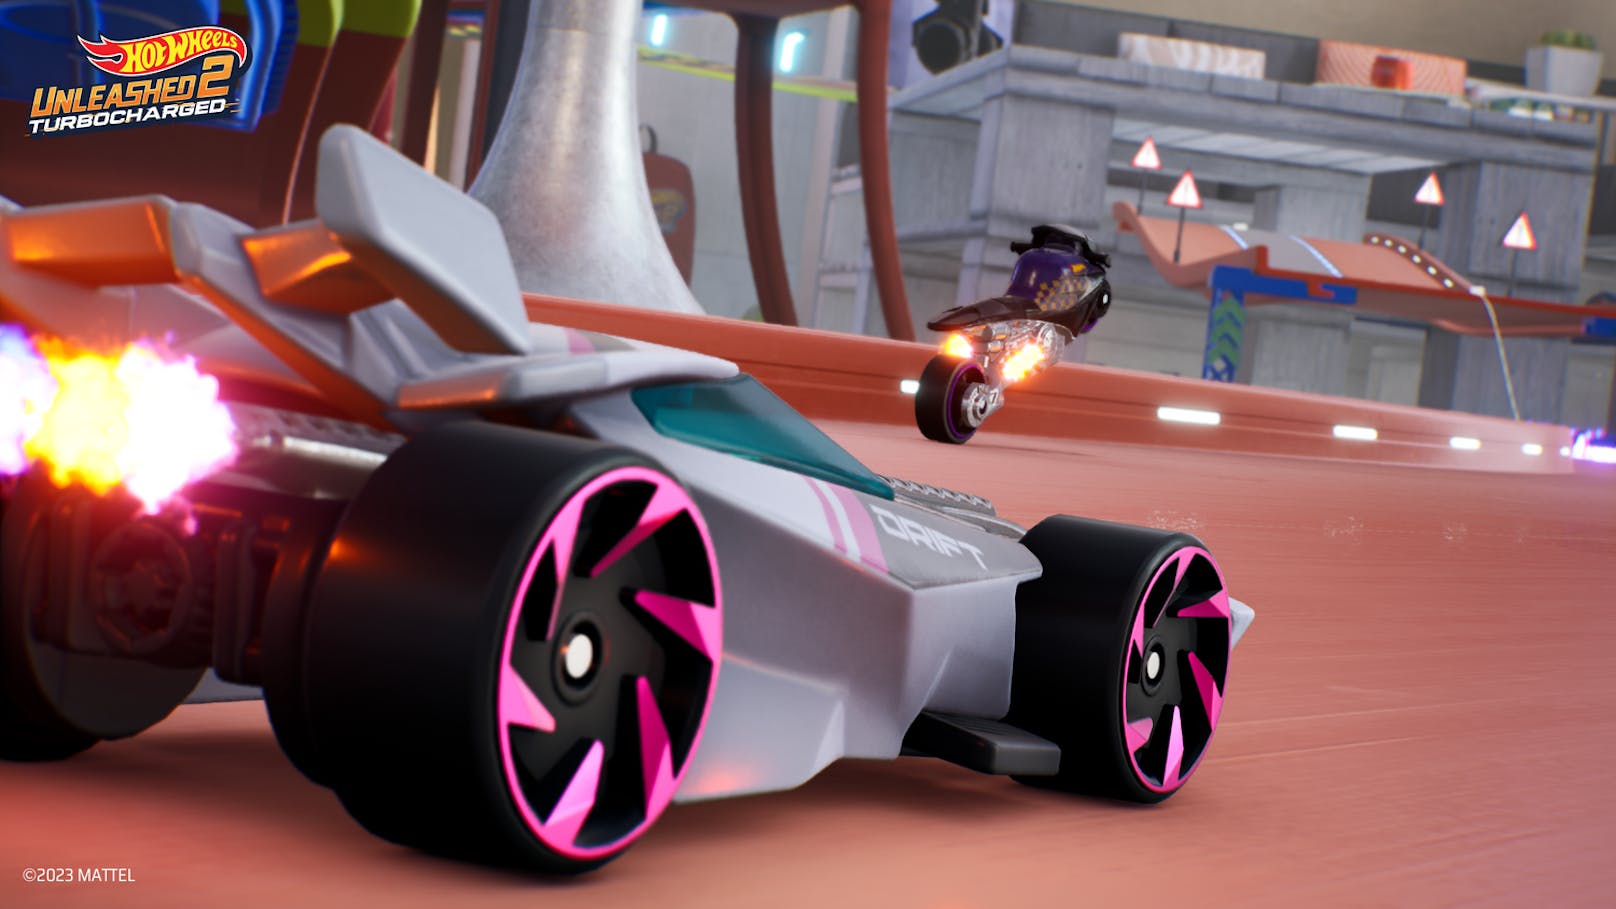 "Hot Wheels Unleashed 2: Turbocharged" – Vollgas